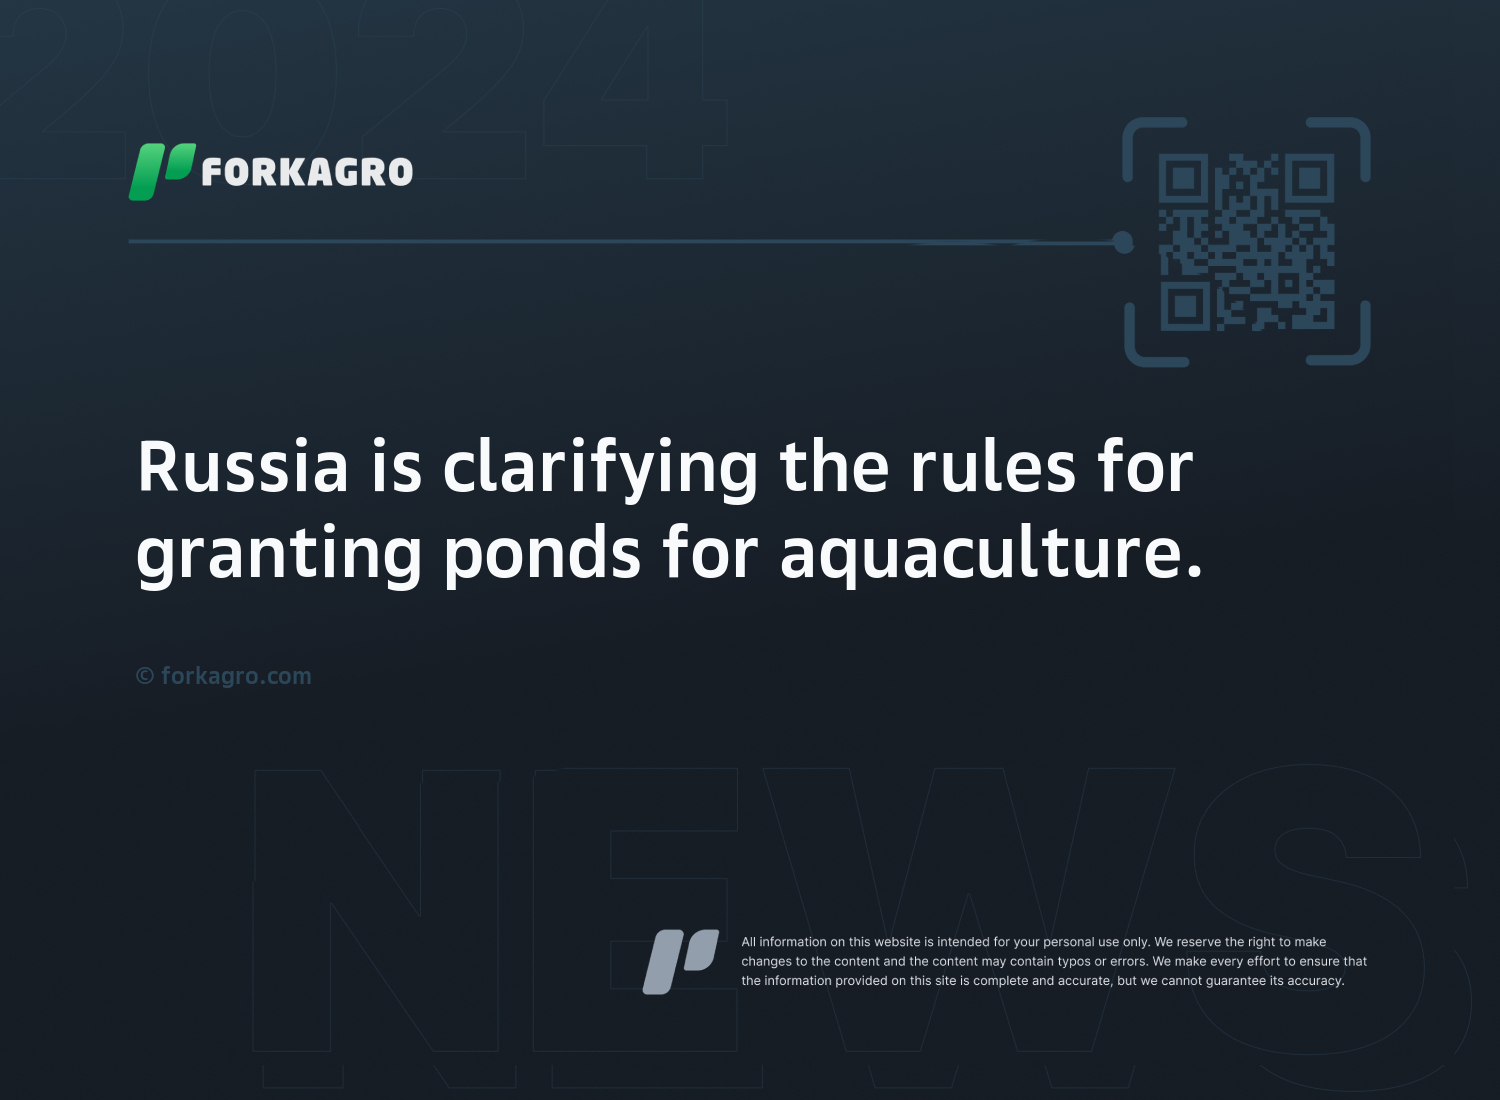 Russia is clarifying the rules for granting ponds for aquaculture.